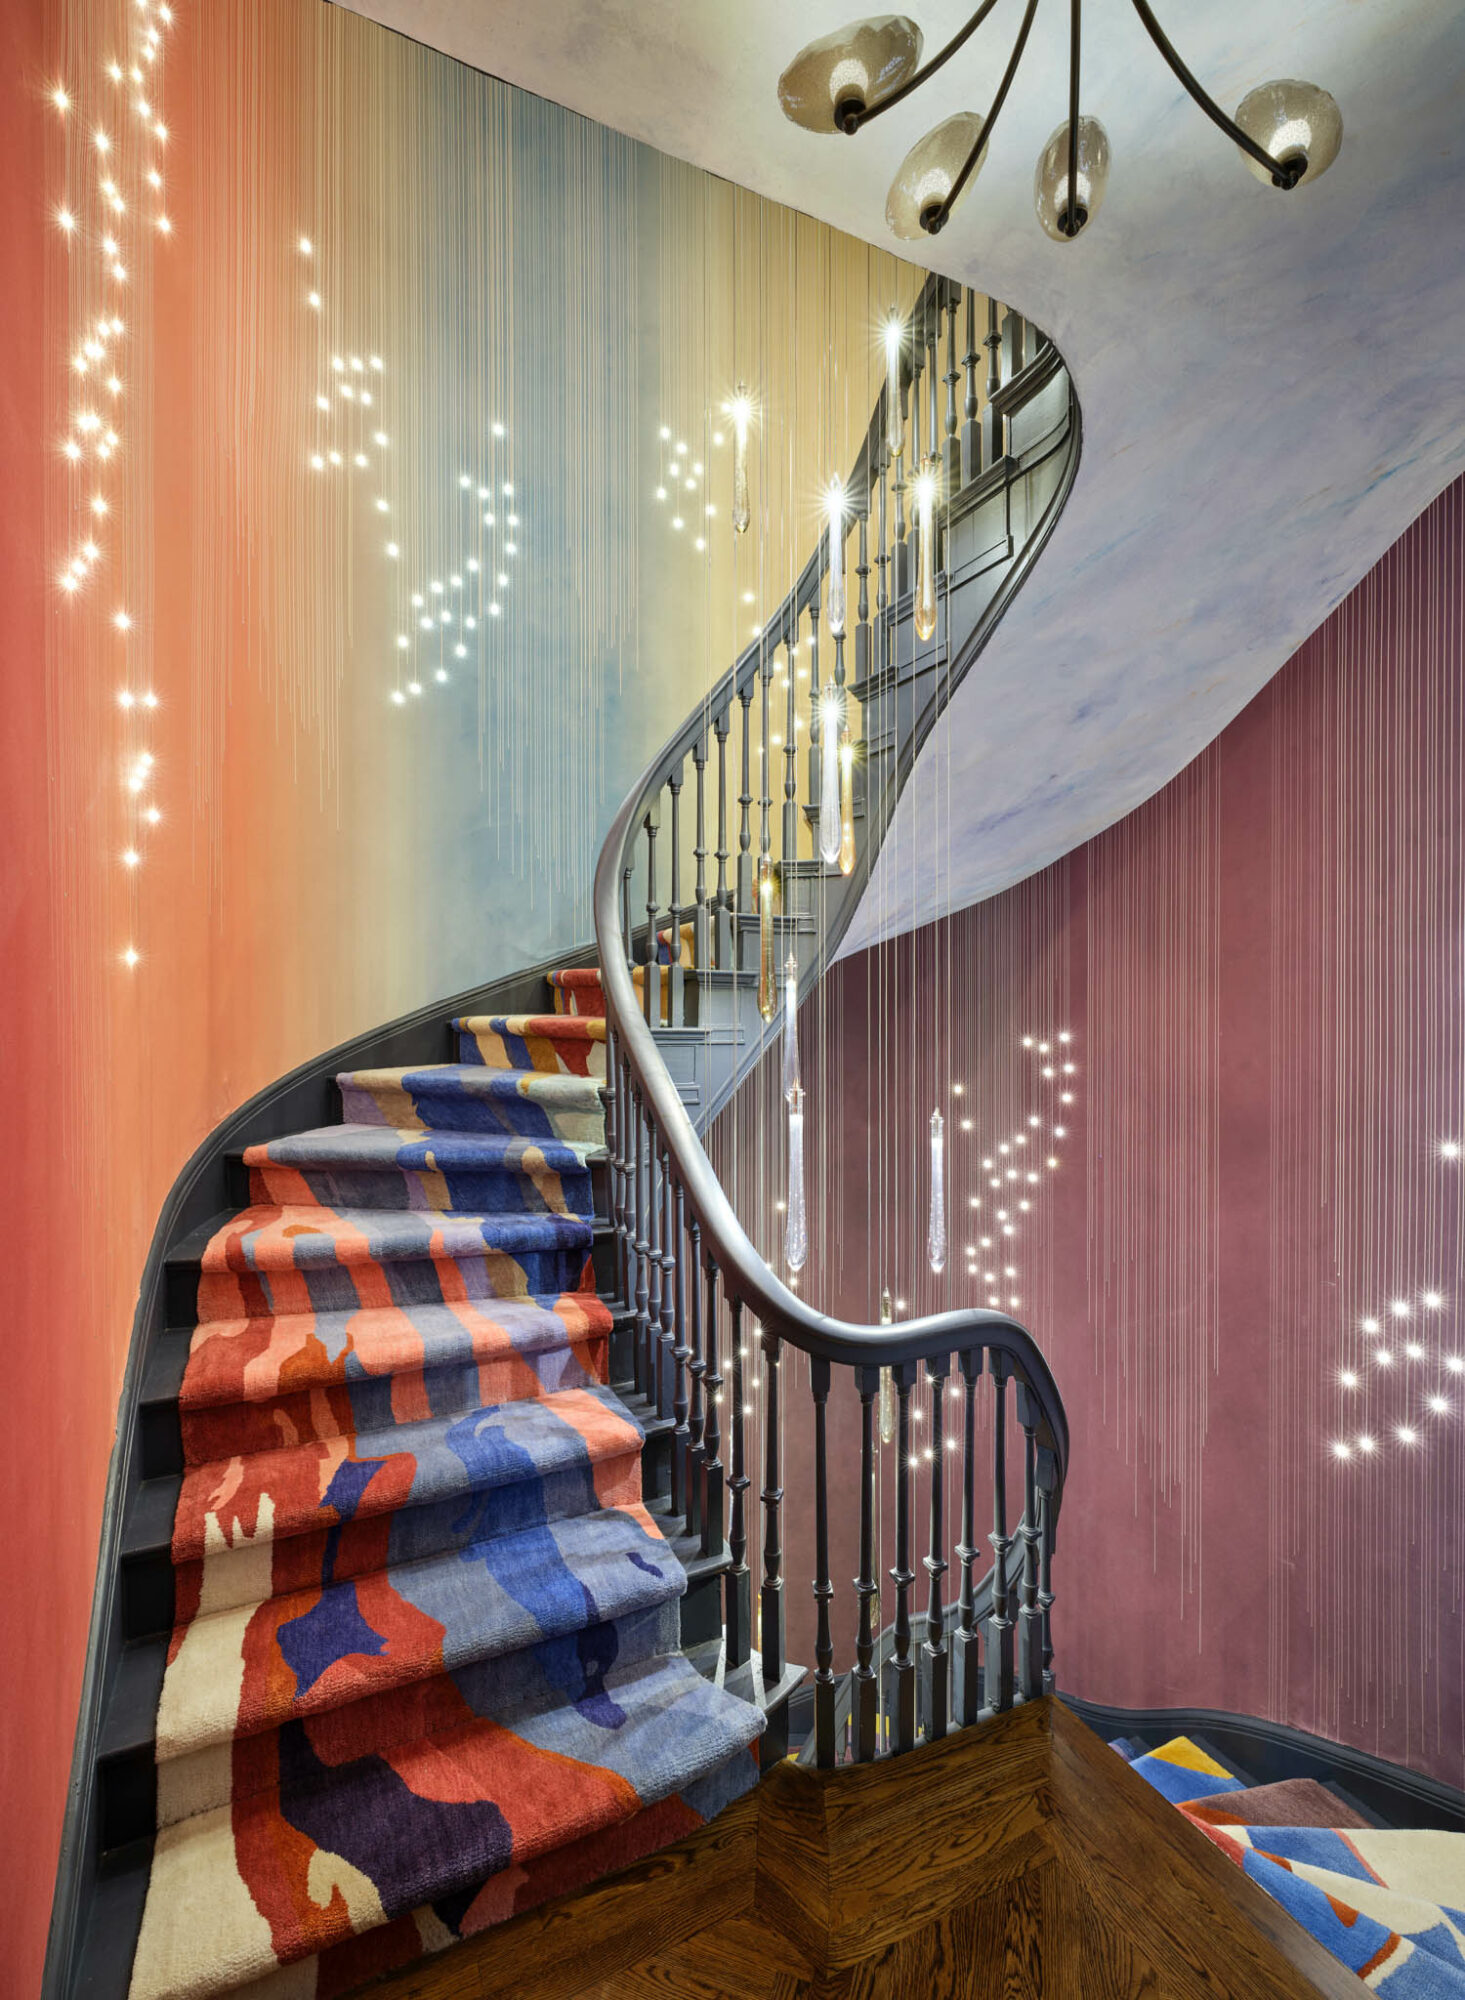 colorful rug lines a staircase with soft lights dangling above the railing